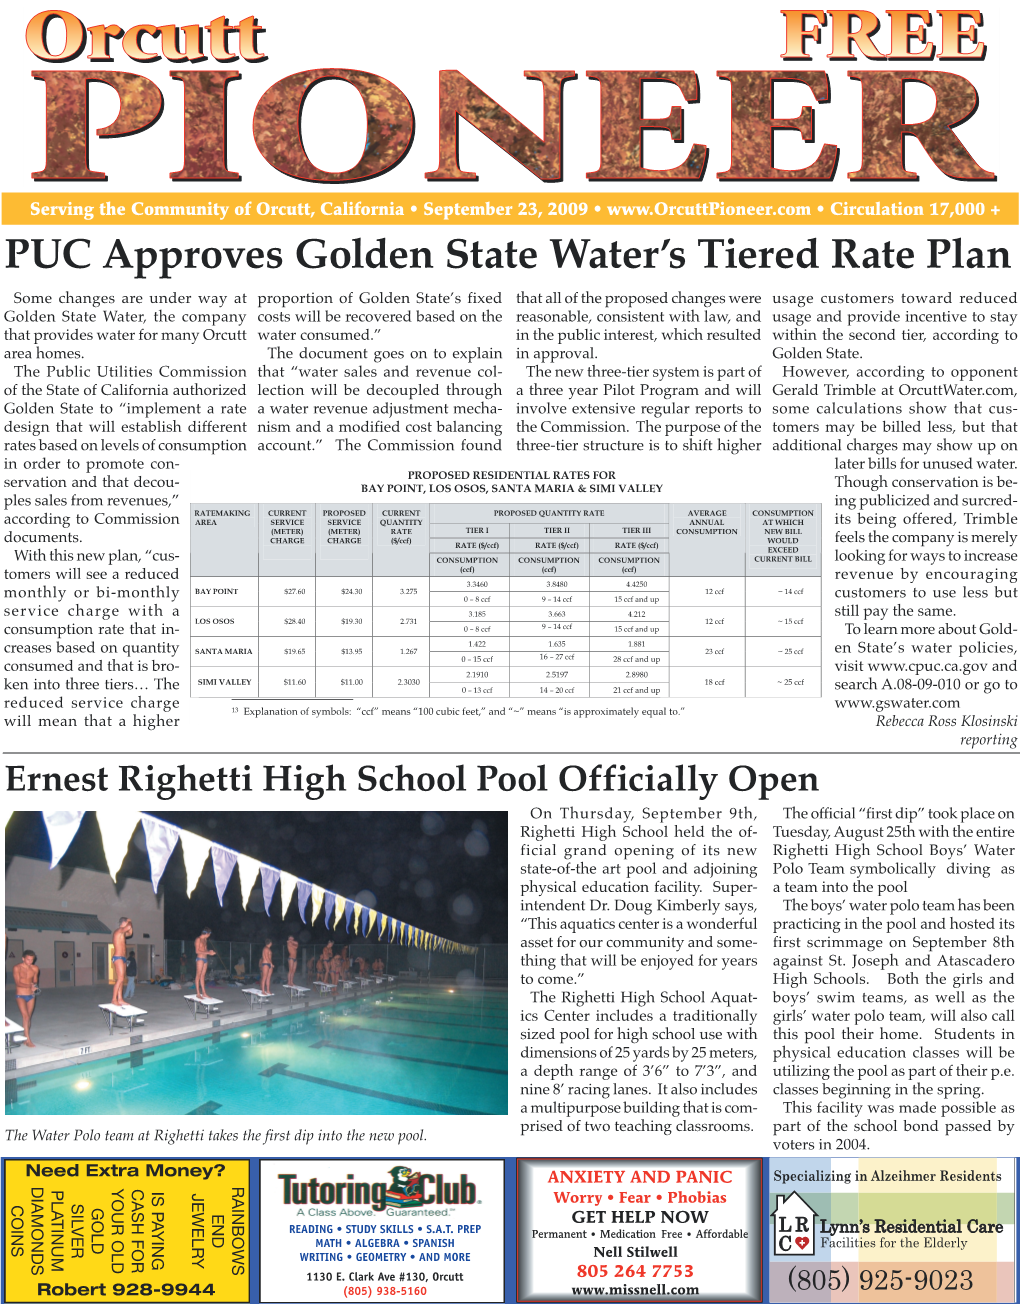 PUC Approves Golden State Water's Tiered Rate Plan